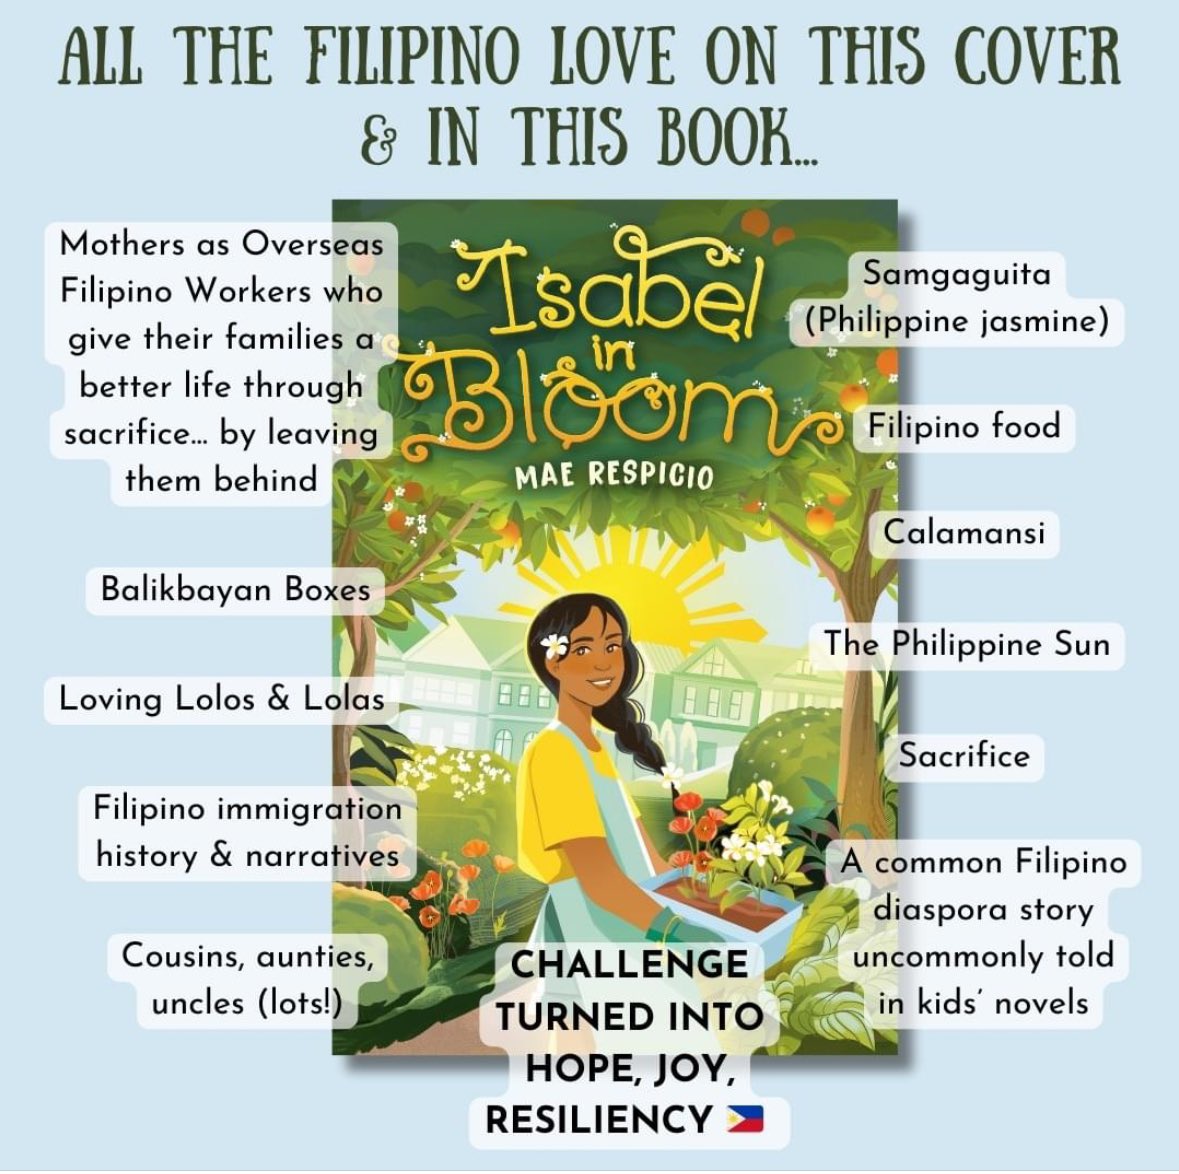 Happy book birthday to @maerespicio! ISABEL IN BLOOM is out today! ! 🎉🎉🎉 #kidlit #MGlit #NewRelease